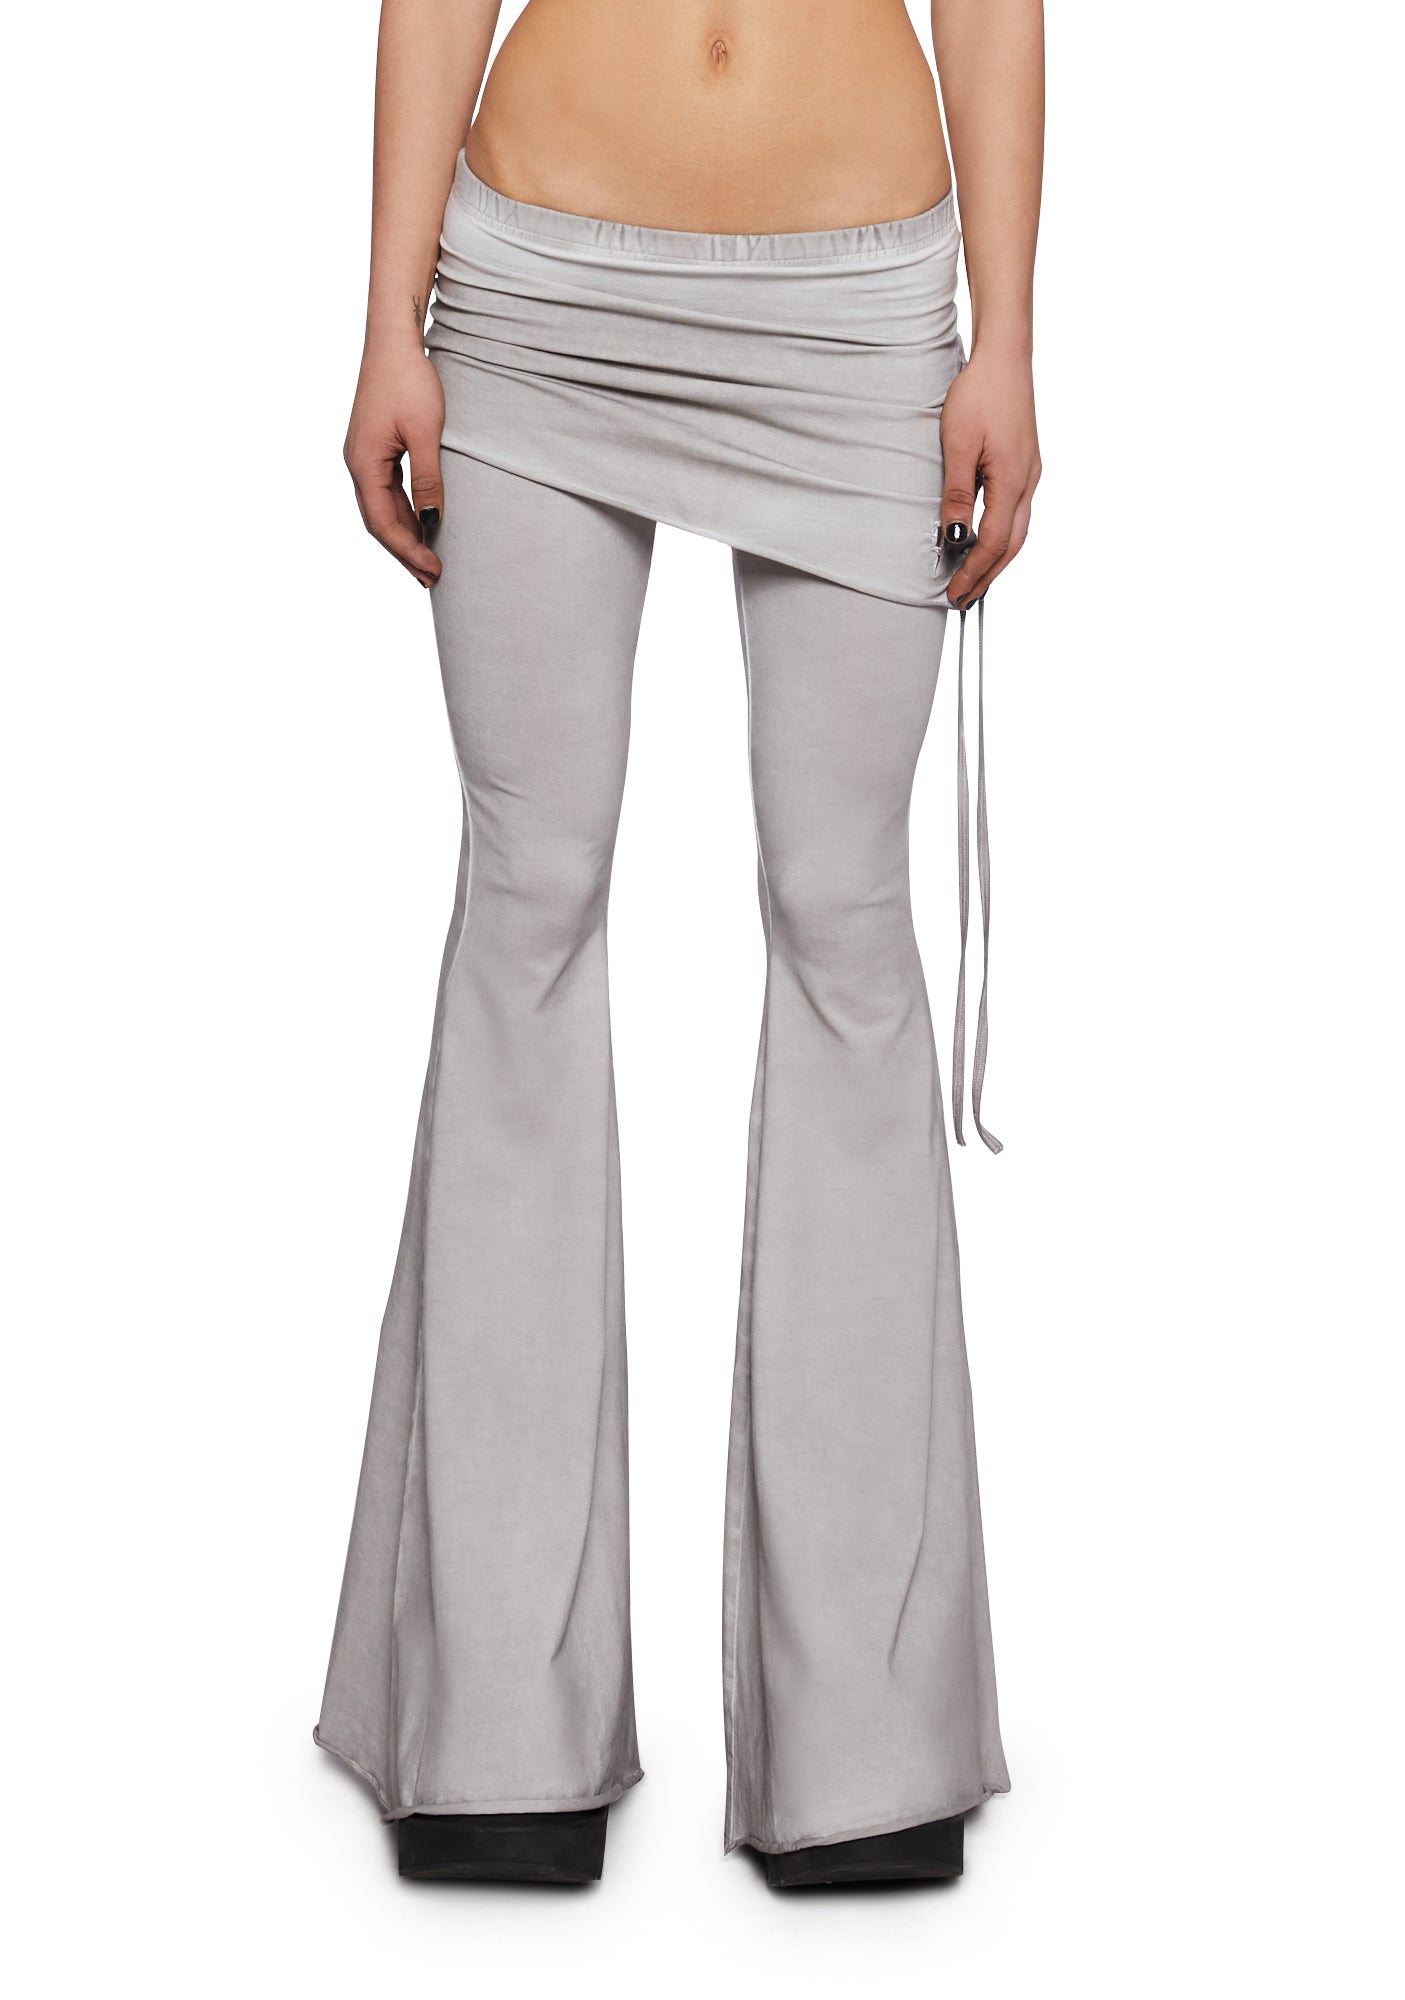 Darker Wavs Lace Up Pants With Skirt Panel - Off White